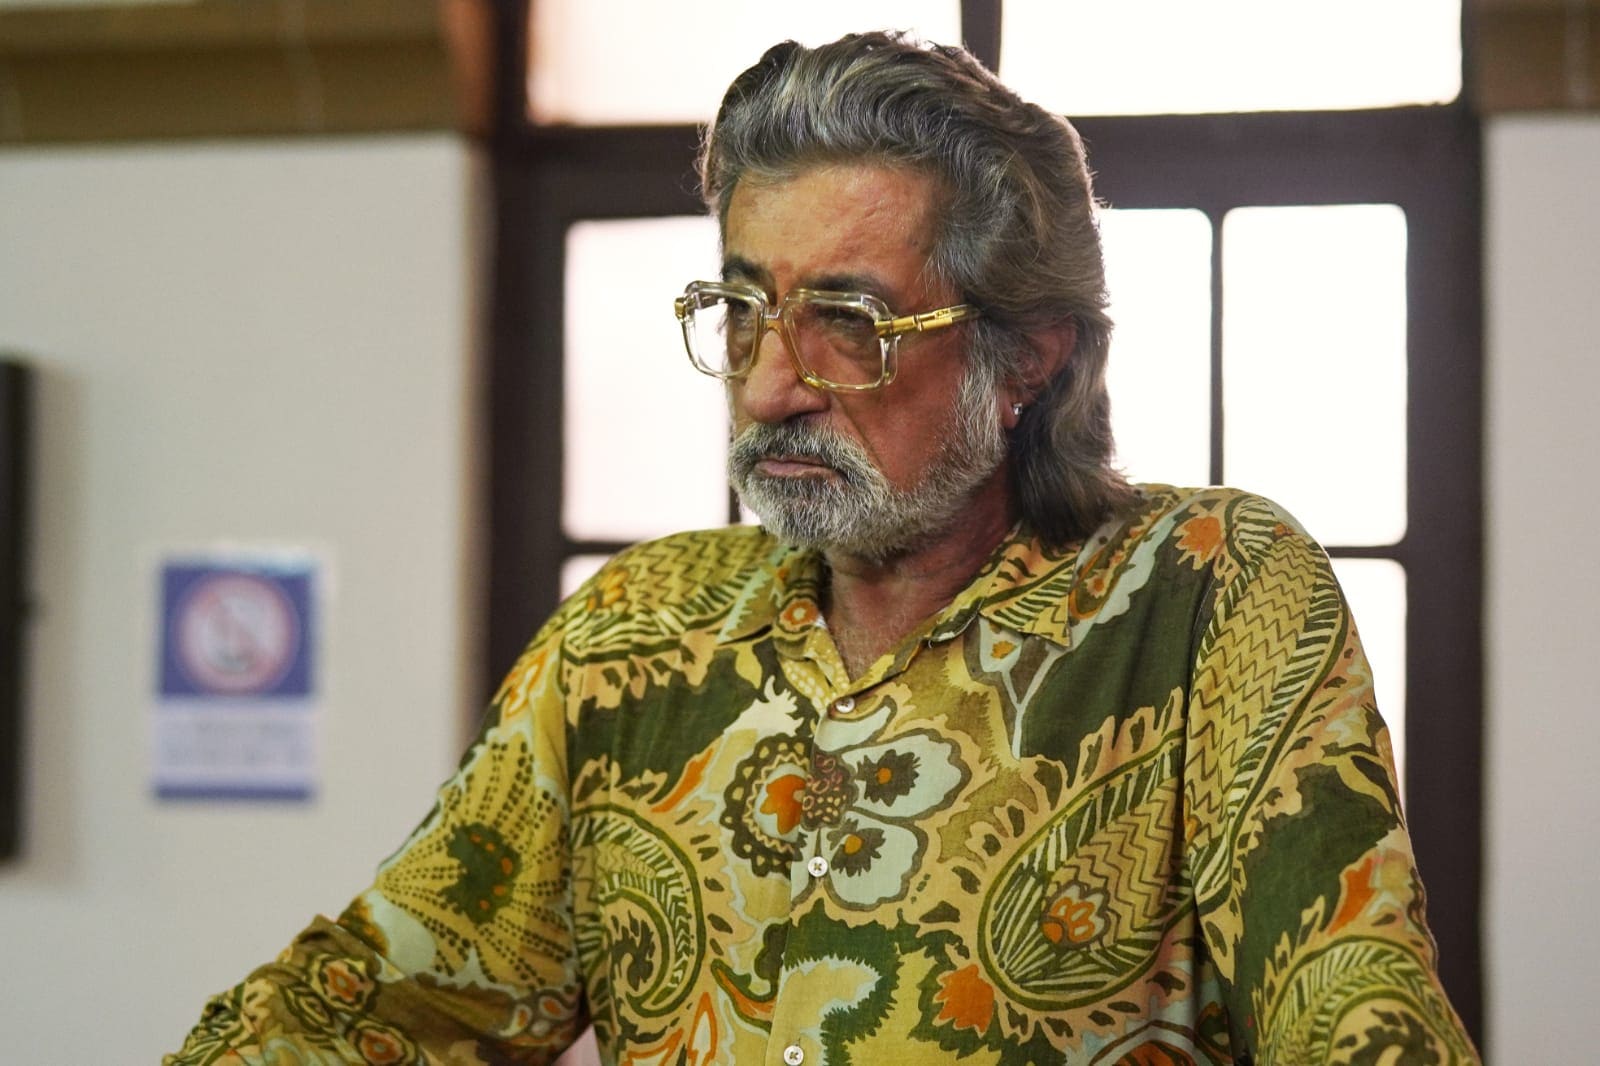 Shakti Kapoor appears as a veteran music composer involved in a plagiarism case in the series.